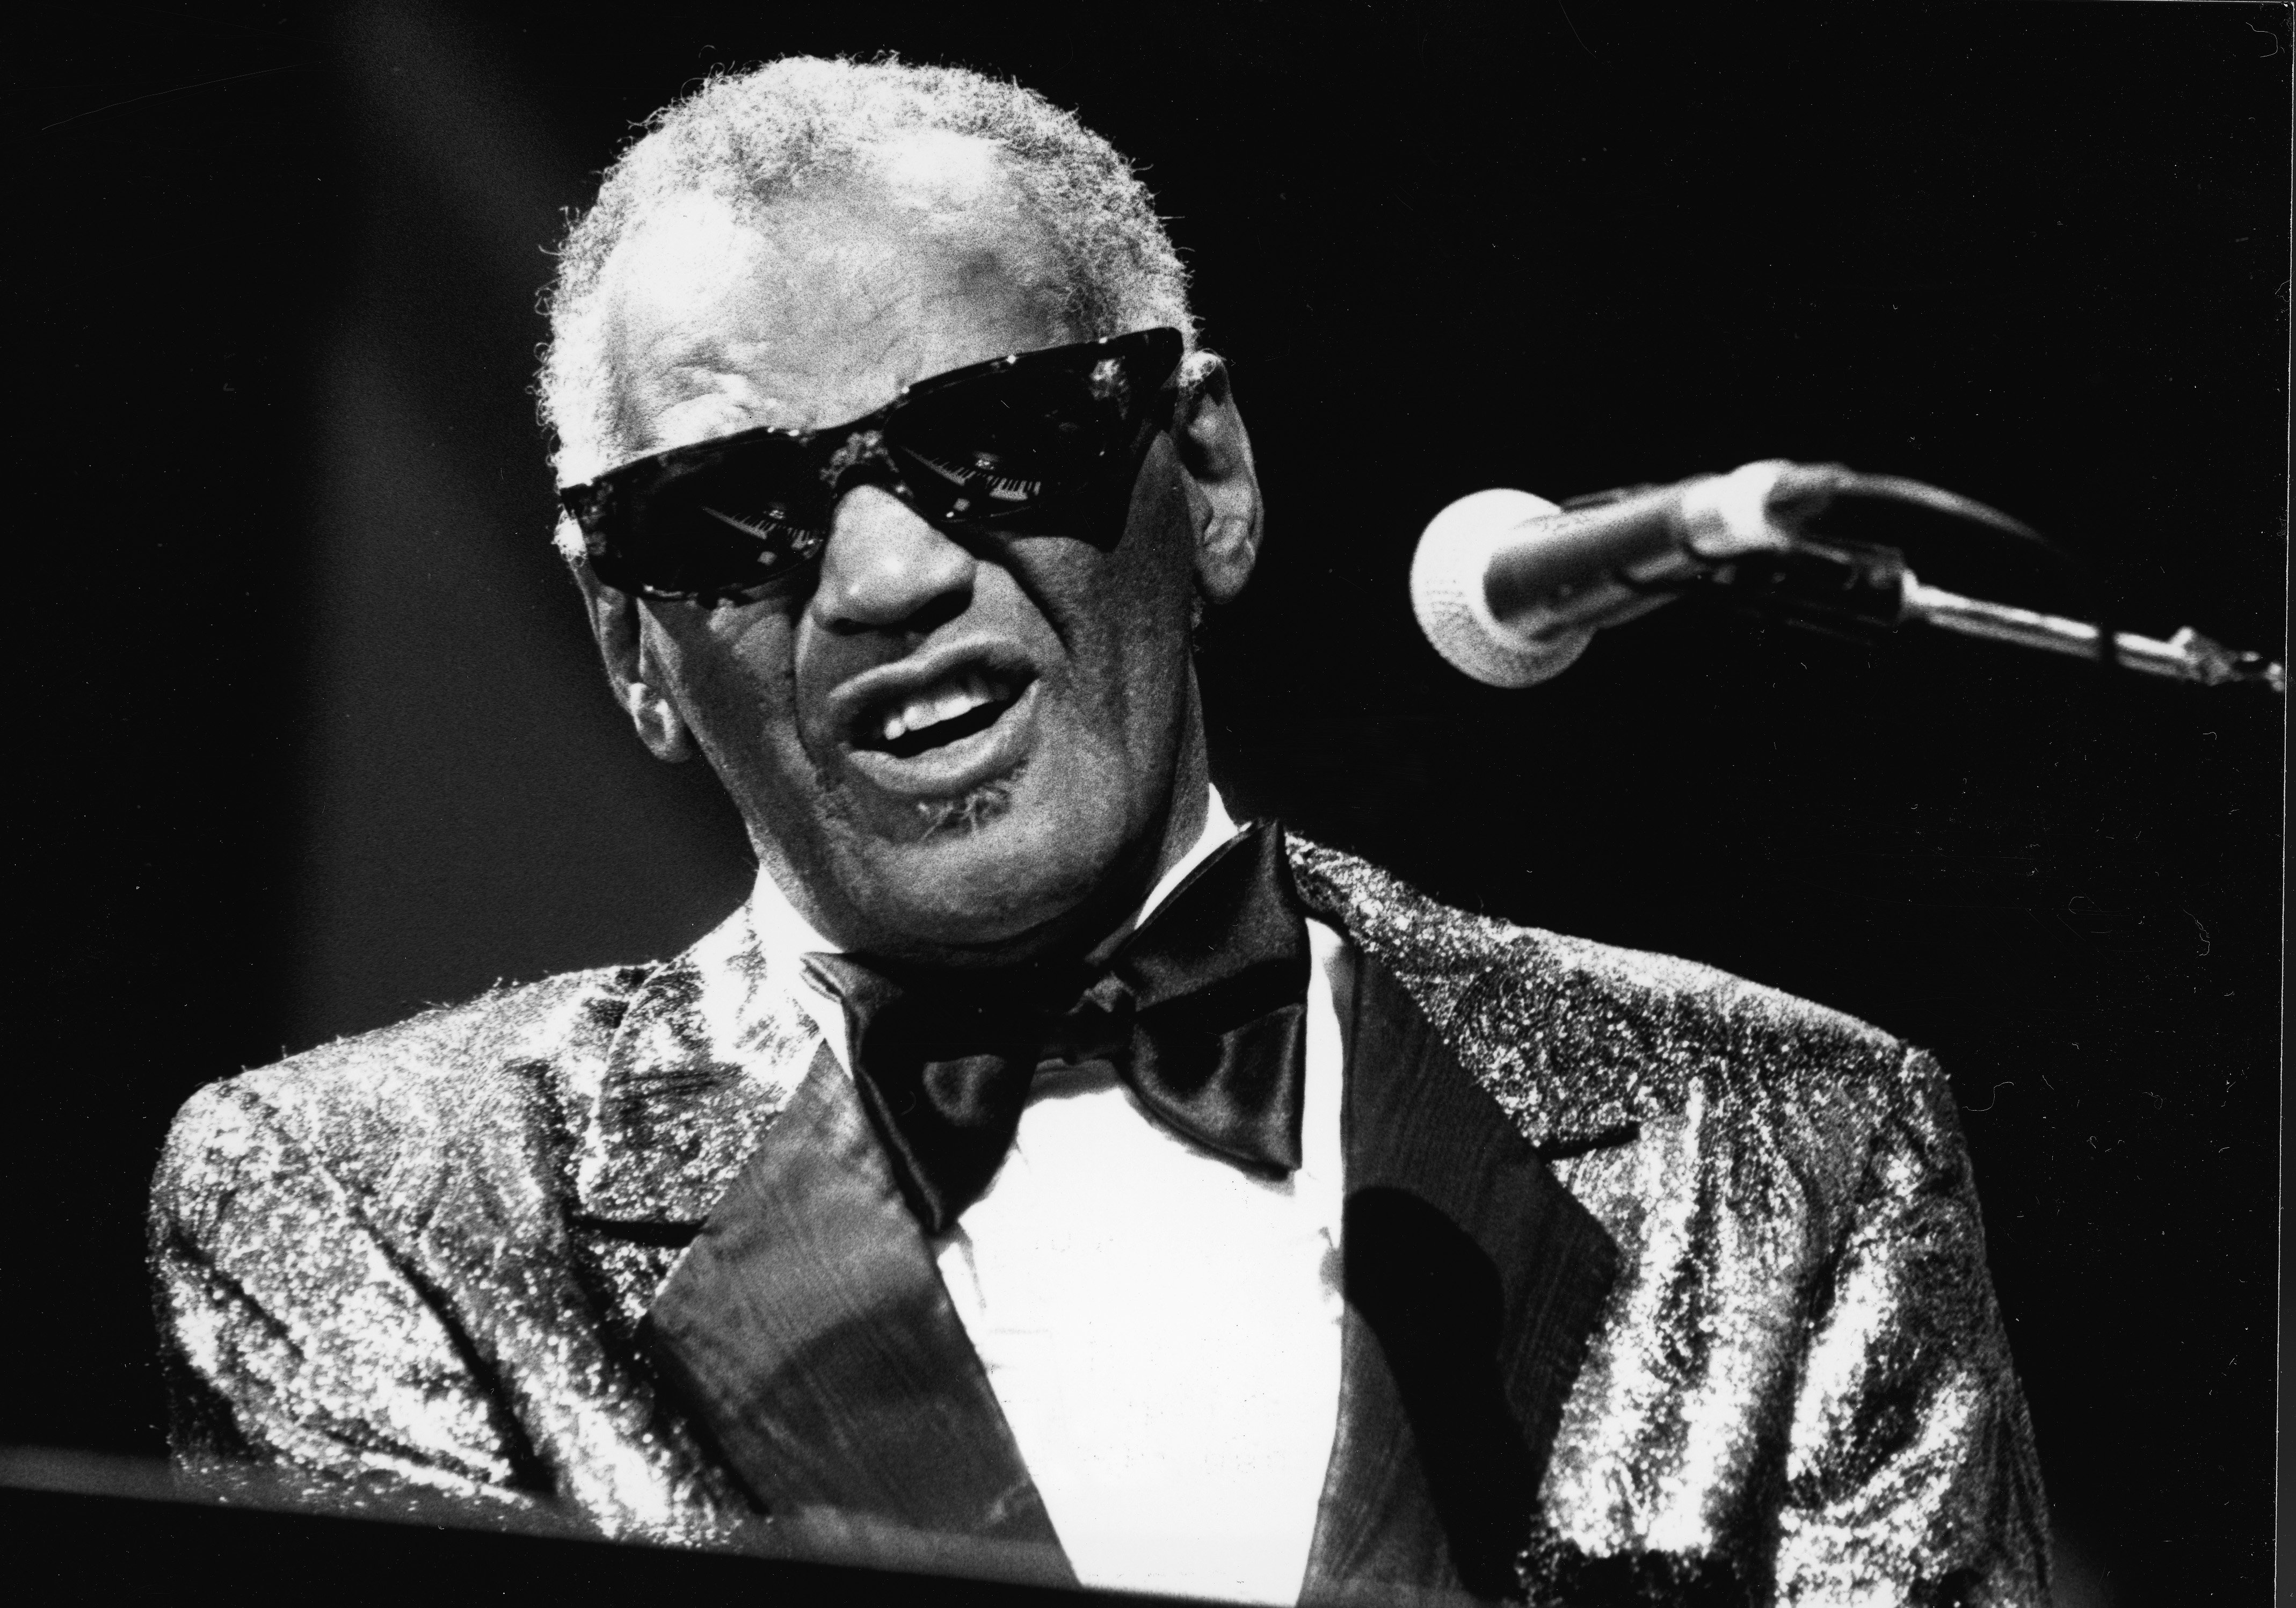 American singer, pianist and songwriter Ray Charles performs in a concert in the 1980s. | Source: Getty Images